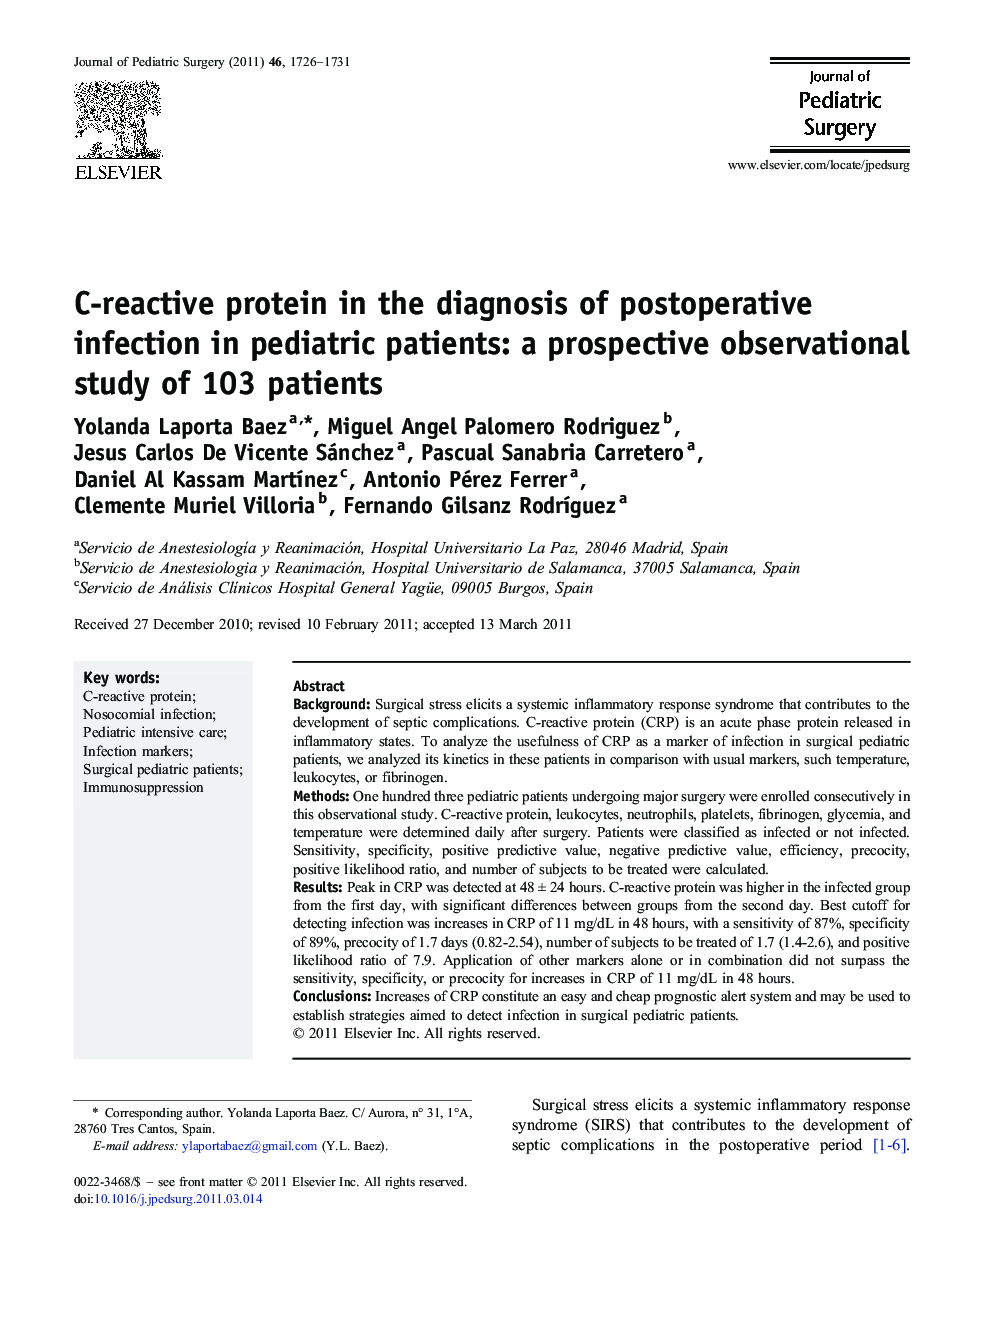 C-reactive protein in the diagnosis of postoperative infection in pediatric patients: a prospective observational study of 103 patients